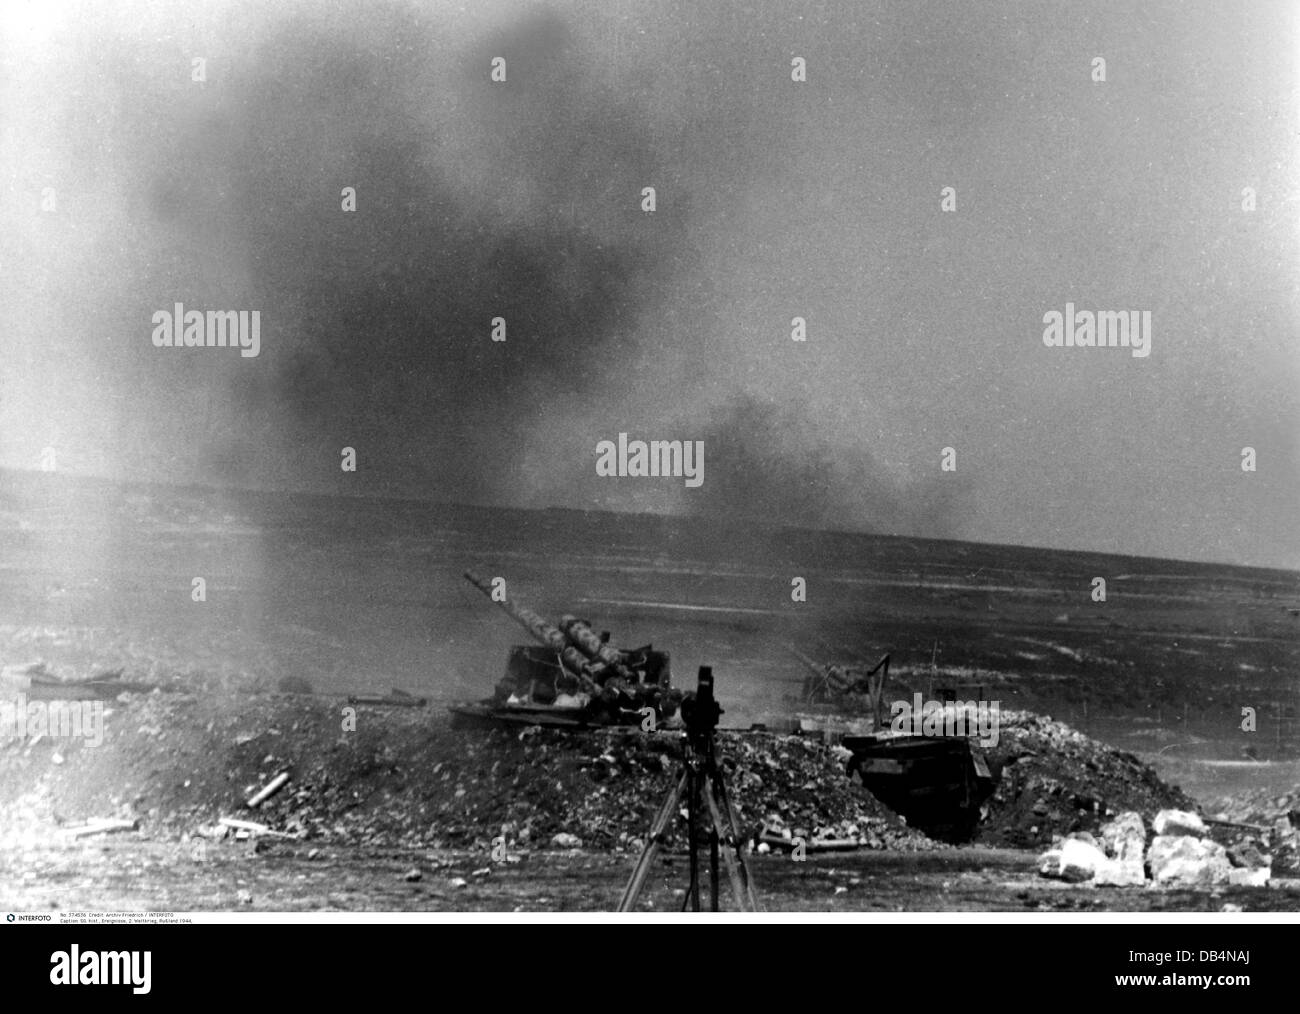 events, Second World War / WWII, Russia 1944 / 1945, Crimea, Sevastopol, German 88 mm anti-aircraft guns firing at attacking Soviet planes, in the foreground the camera of a German war correspondent, 26.4.1944, battery, AA, firing, gun, aerial warfare, Luftwaffe, Eastern Front, USSR, Soviet Union, emplacement, 20th century, historic, historical, Wehrmacht, Third Reich, Germany, 8.8 cm, people, 1940s, Additional-Rights-Clearences-Not Available Stock Photo